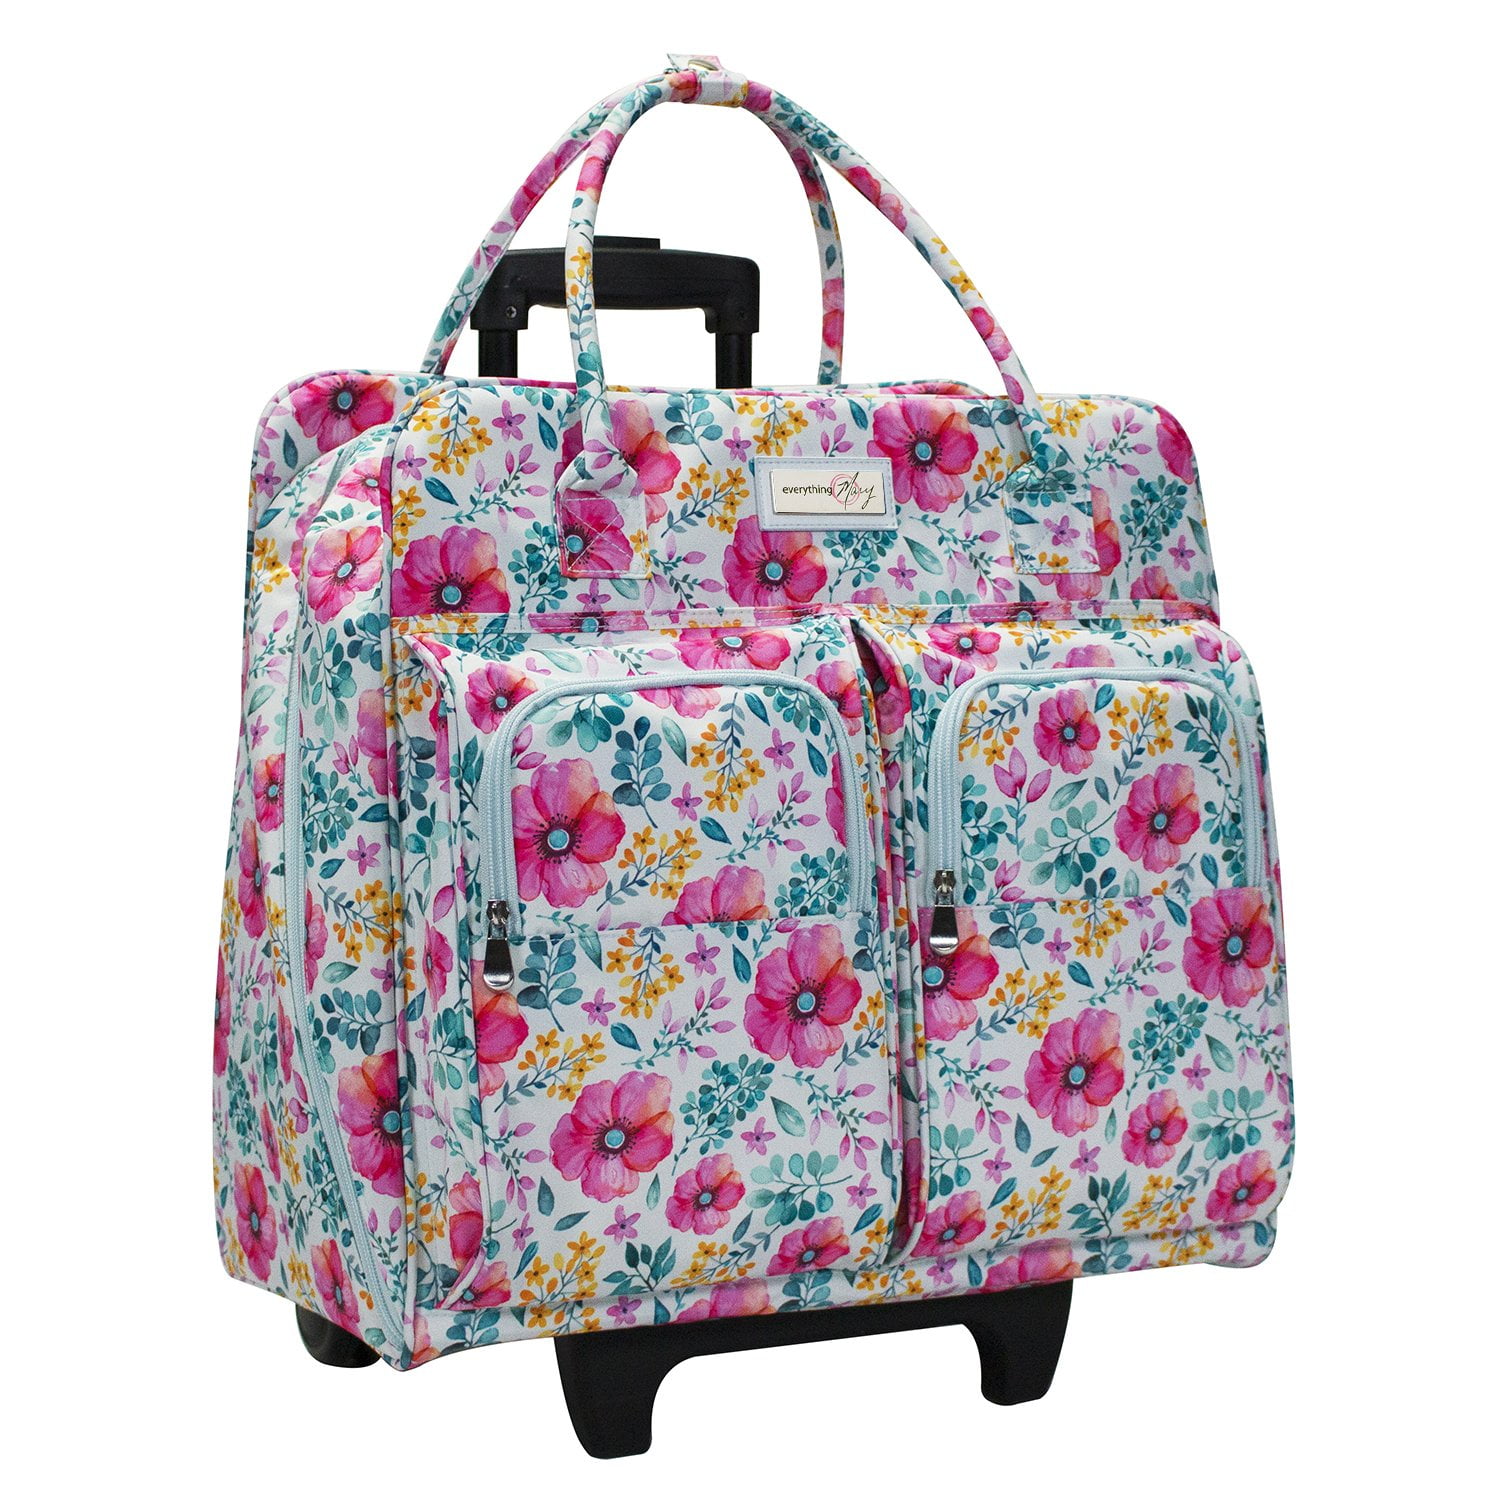 Everything Mary Rolling Sewing Machine Case, Blue Floral 